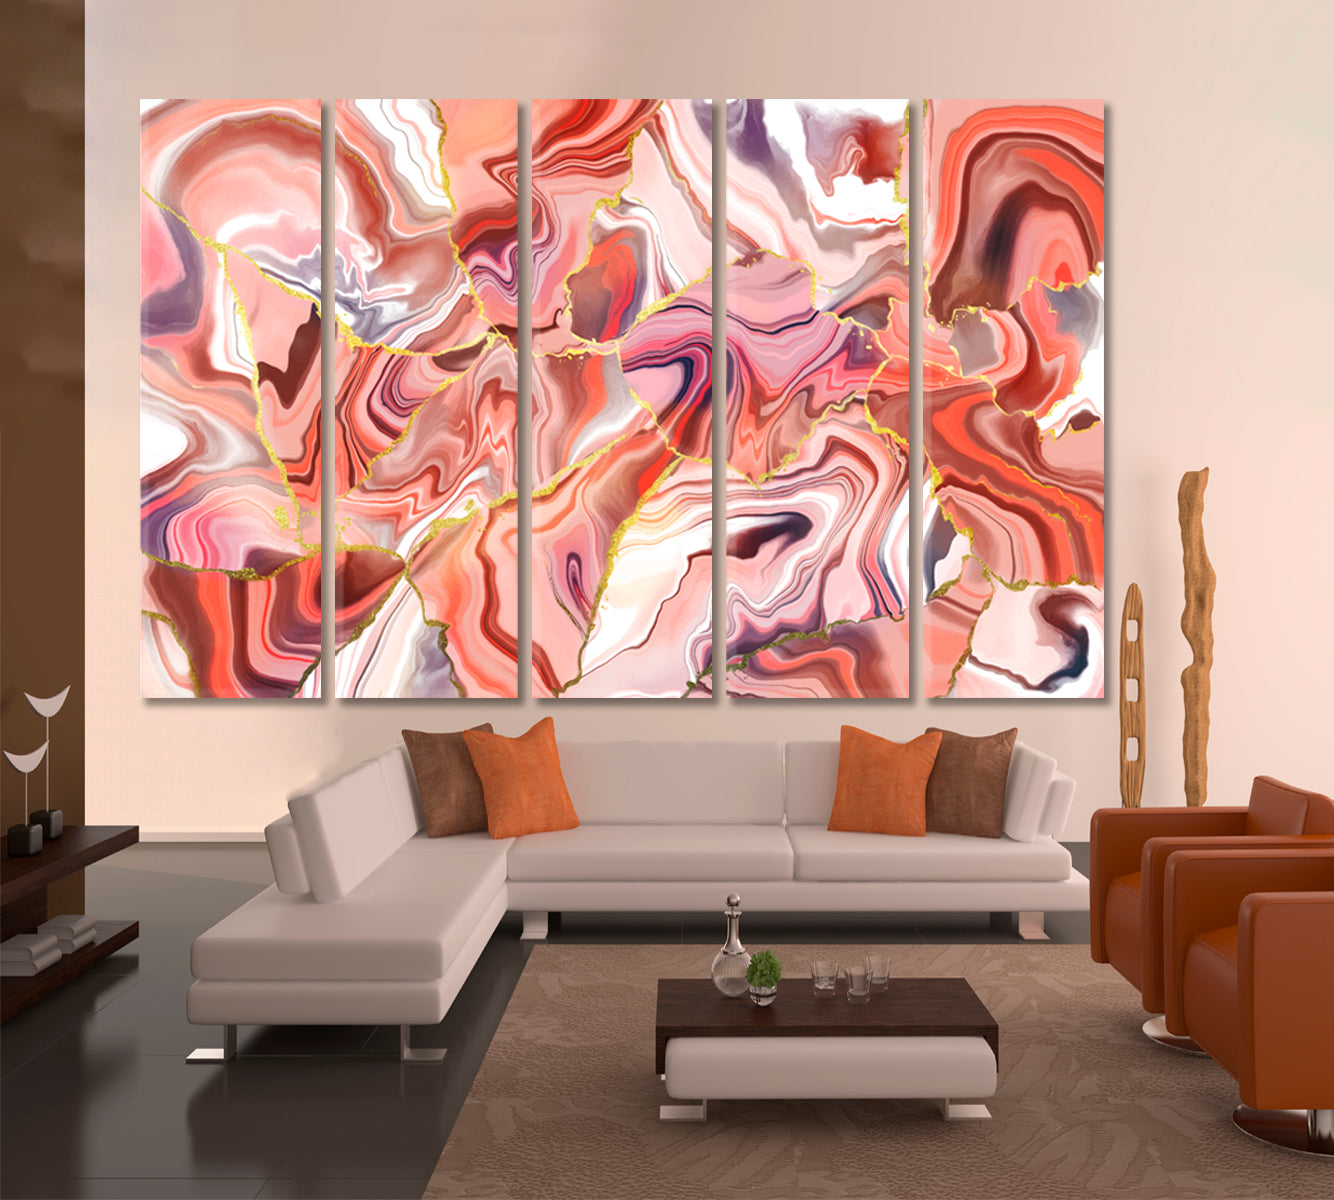 Coral Peachy Beige Mix Abstract Wavy Forms Fractal Futuristic Pattern Contemporary Art Artesty 5 panels 36" x 24" 